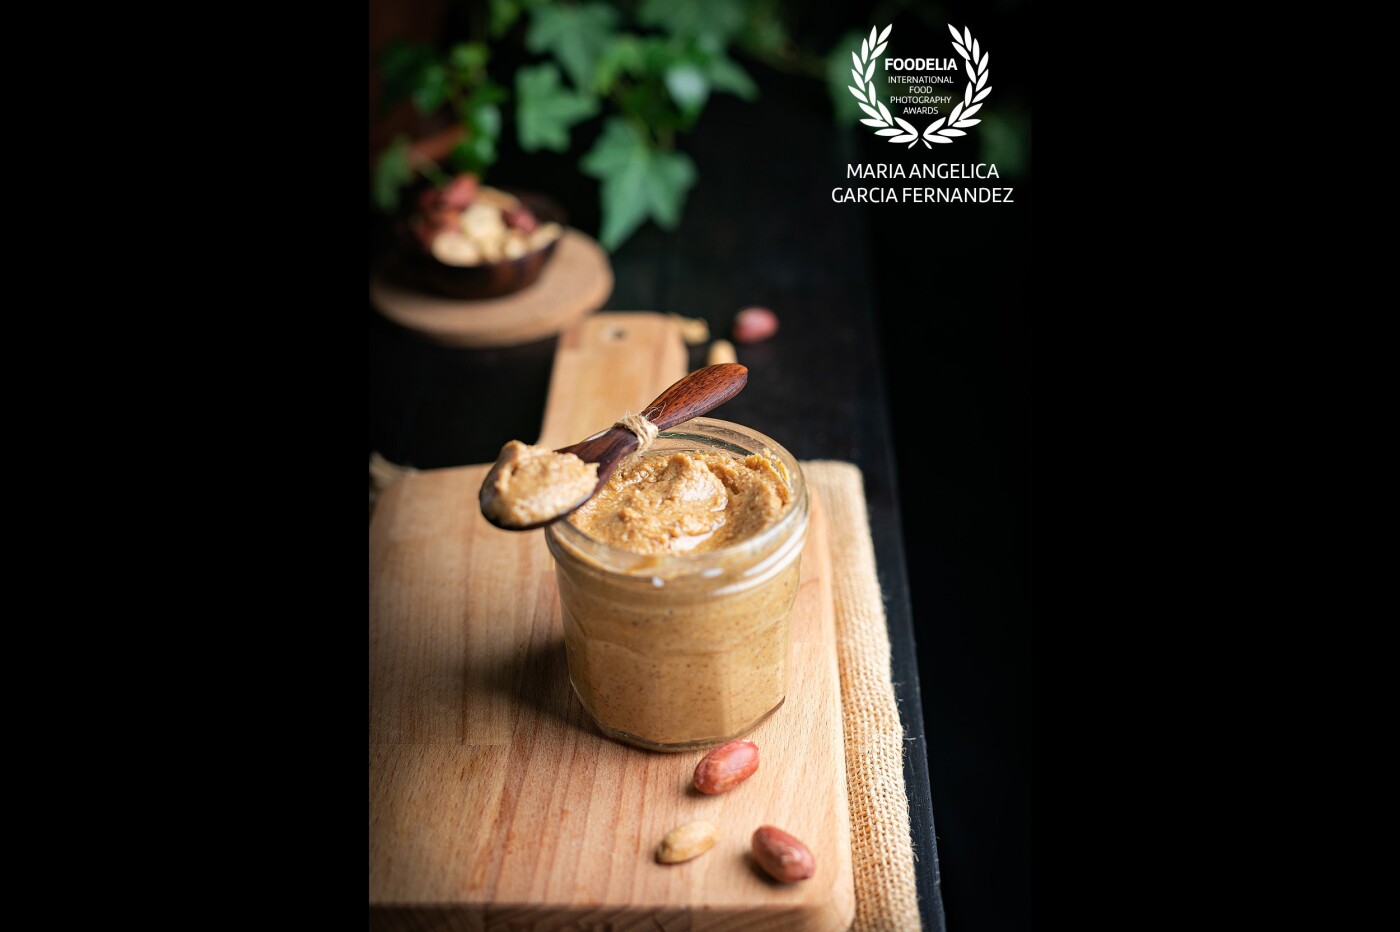 Decided to inspire people to eat healthily and cook at home... I prepared  "Homemade crunchy Peanut Butter". It was the first time that I prepared this recipe at home for the family and I super satisfied with the resulting kid enjoy it and the beautiful photography that I have done.